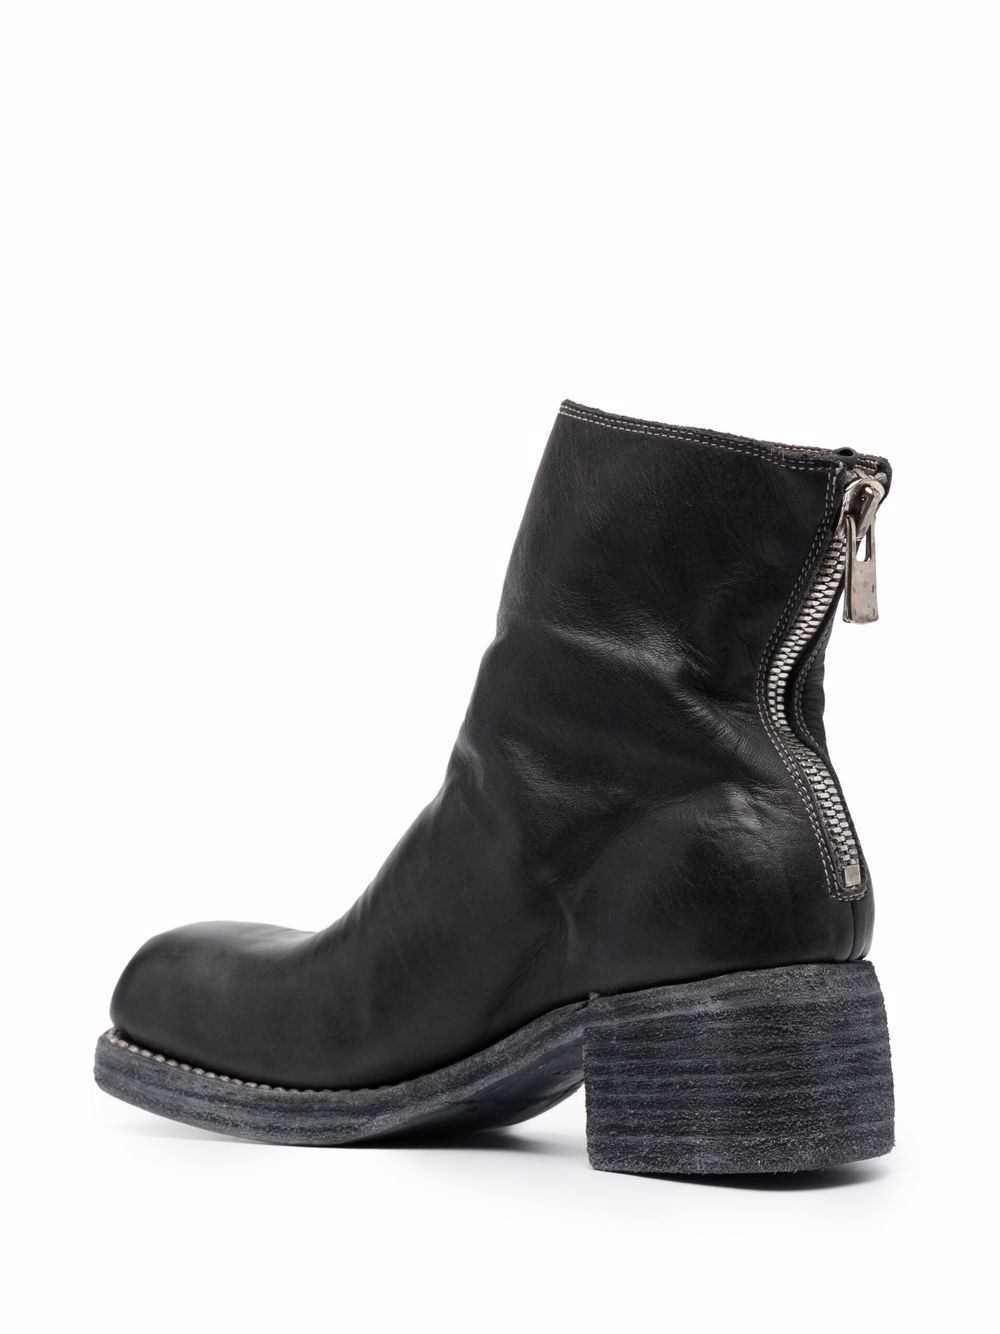 zip-front ankle boots - 3